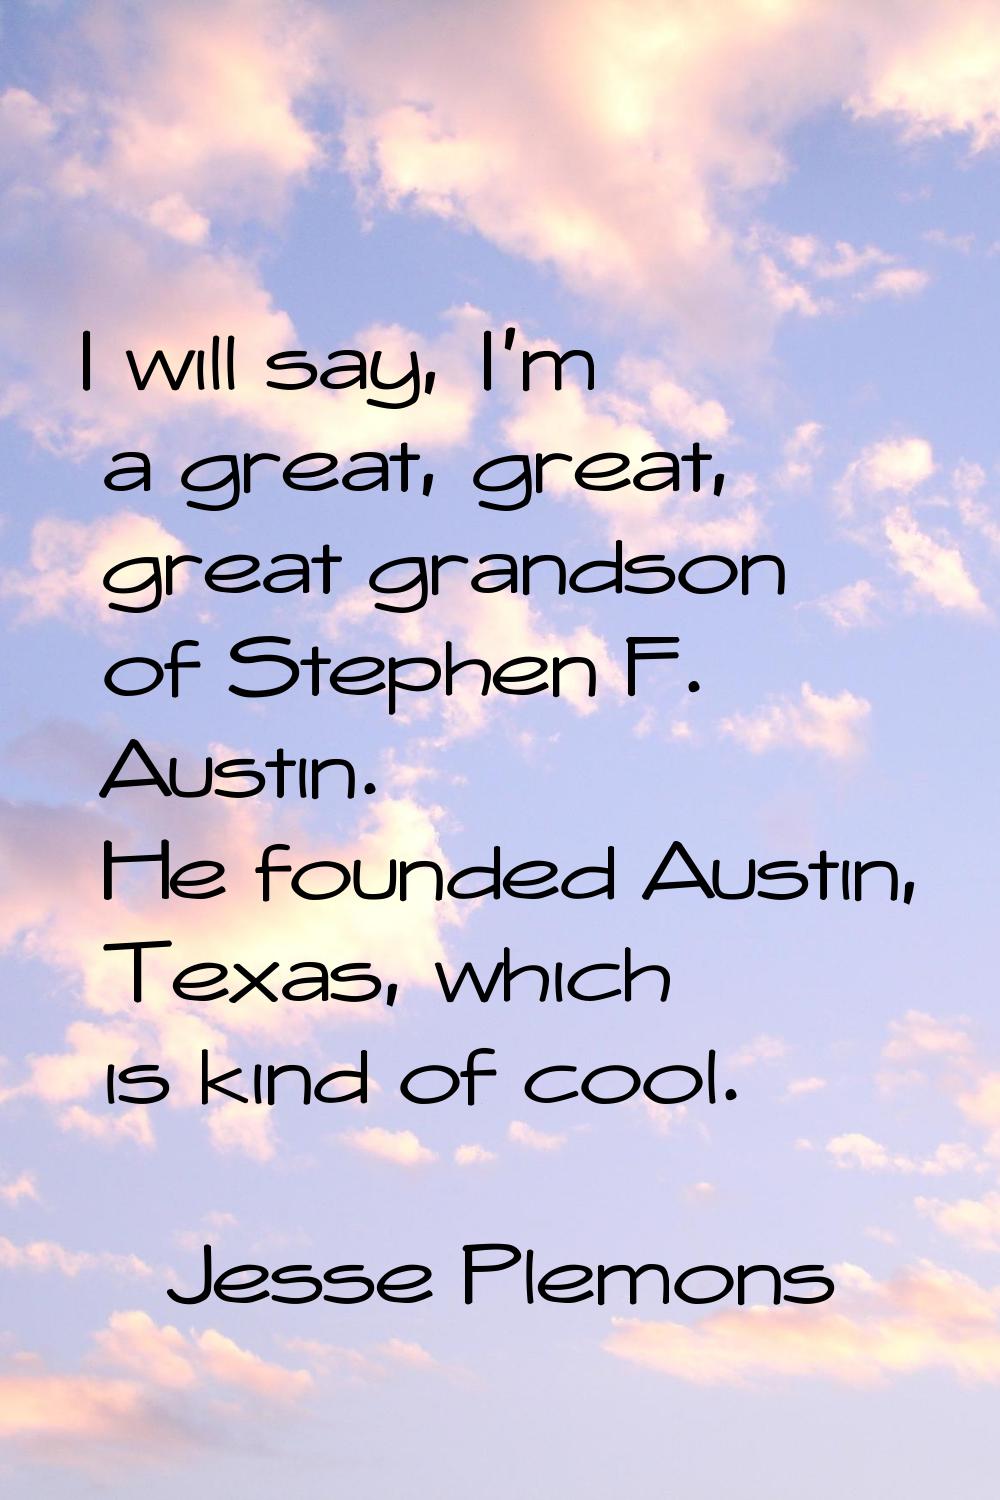 I will say, I'm a great, great, great grandson of Stephen F. Austin. He founded Austin, Texas, whic